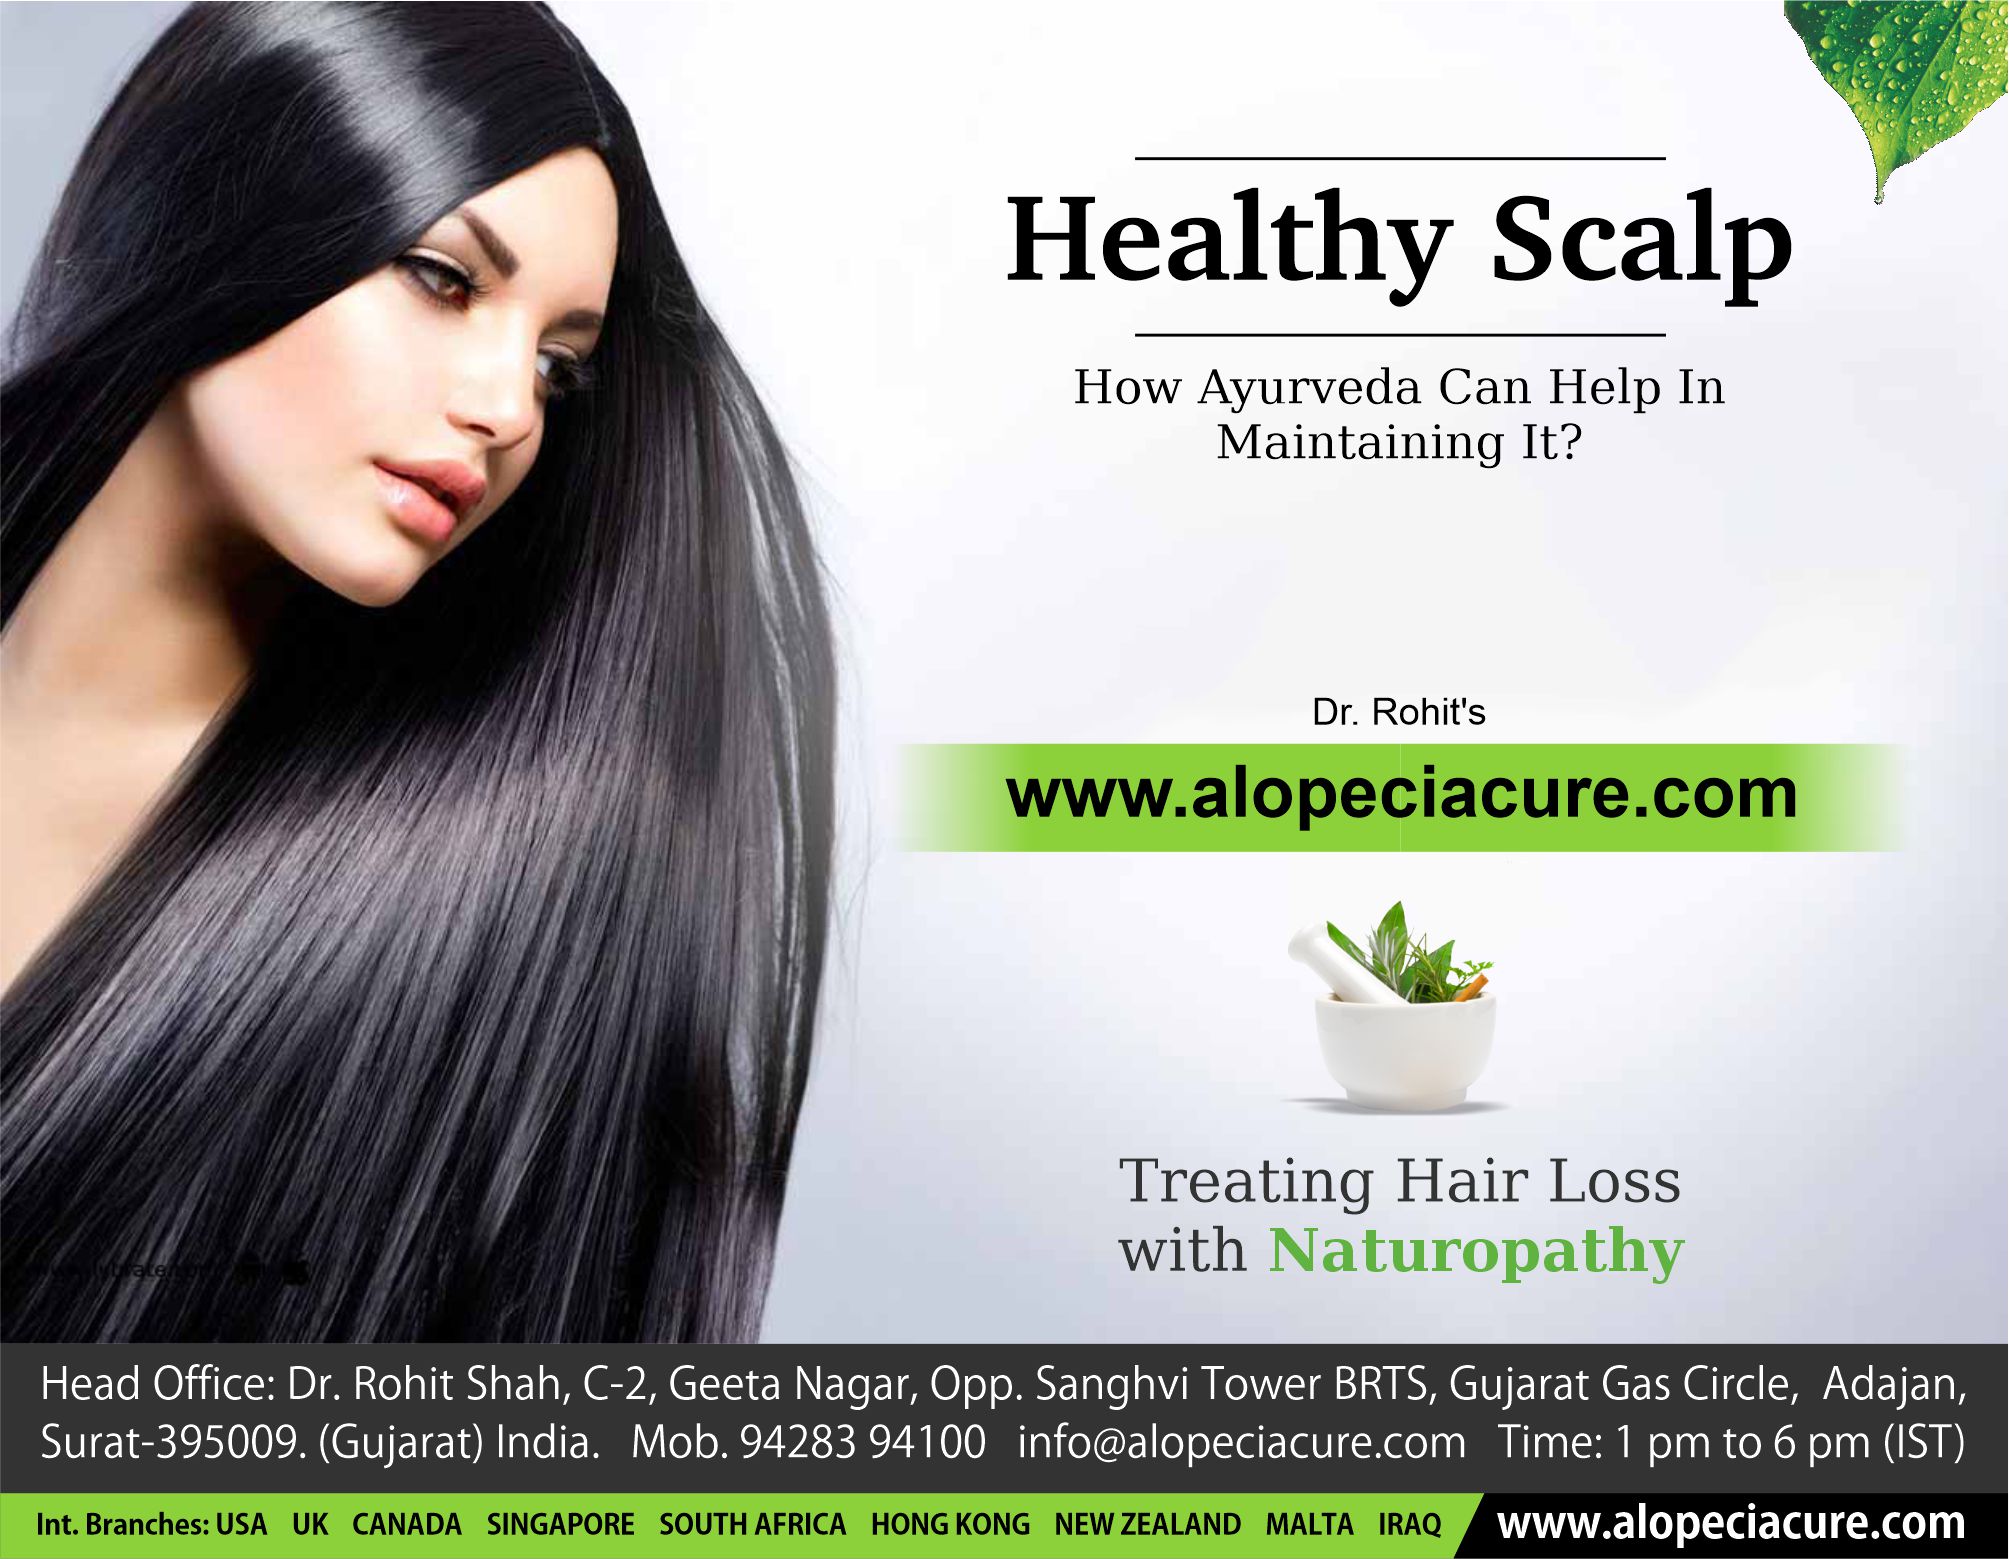 Healthy Scalp - How Ayurveda Can Help In Maintaining It?